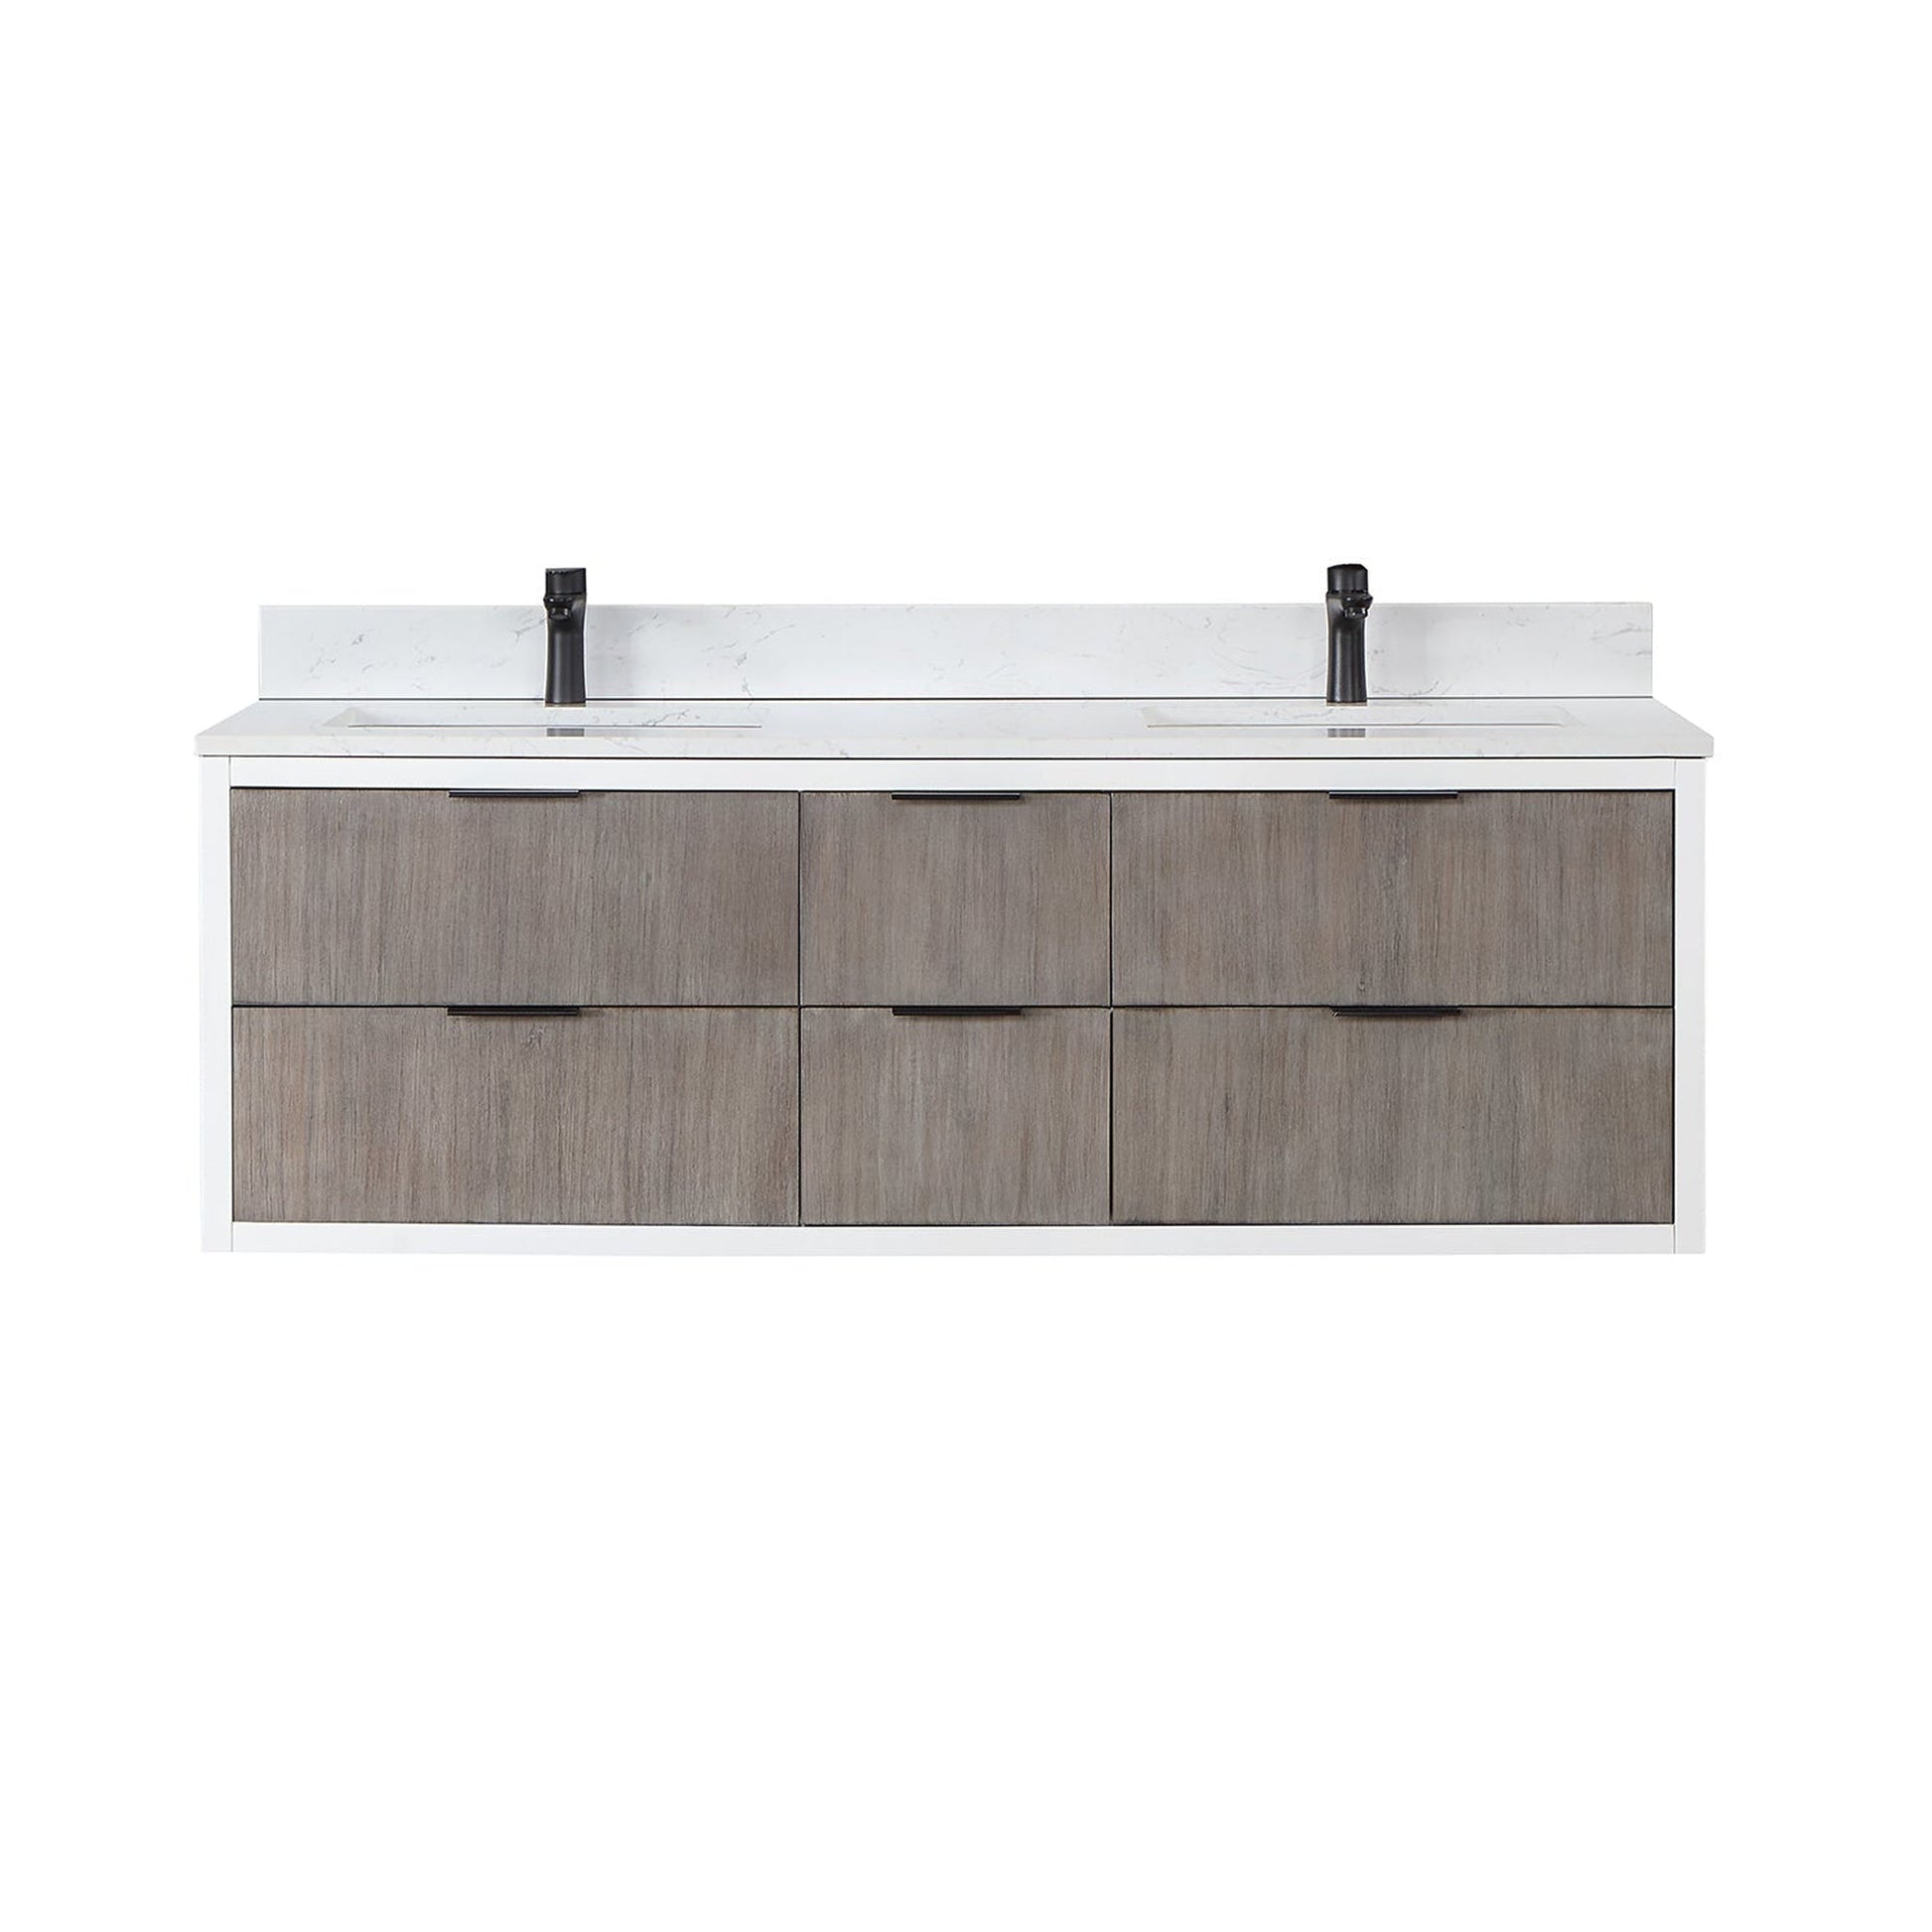 Altair Dione 60" Double Classical Gray Wall-Mounted Bathroom Vanity Set With Aosta White Composite Stone Top, Double Rectangular Undermount Ceramic Sinks, Overflow, and Backsplash